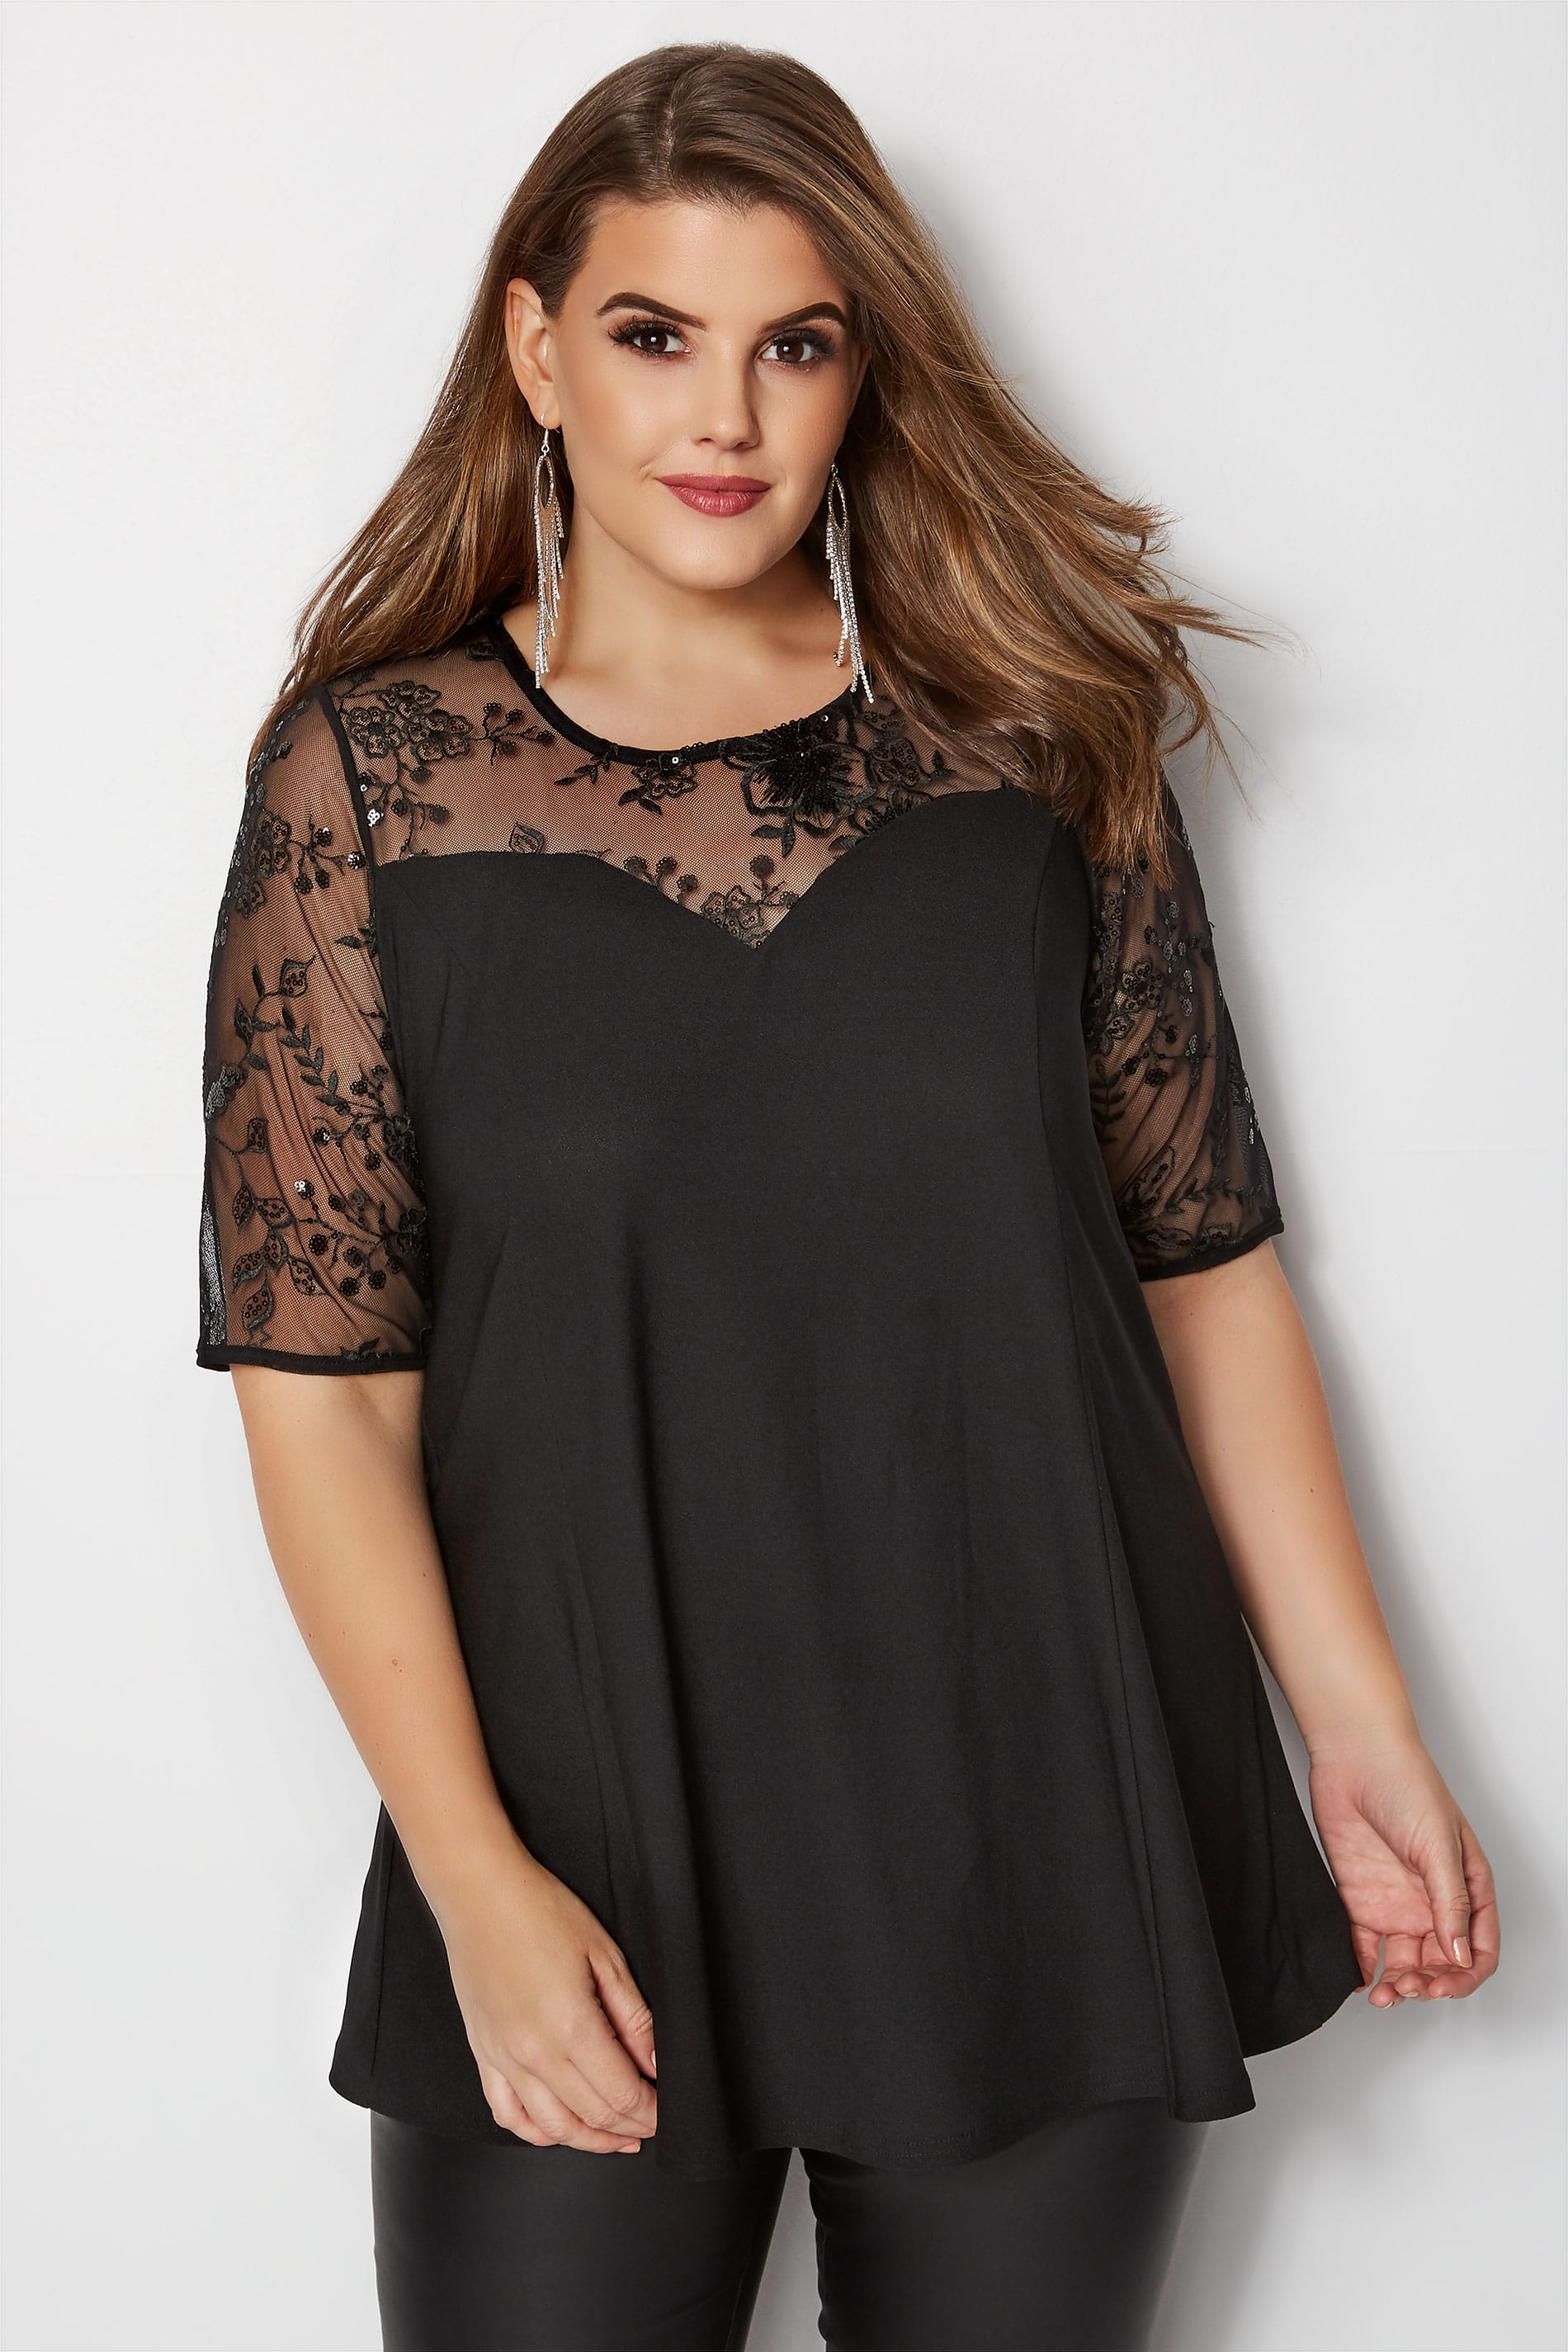 YOURS LONDON Black Sequin Peplum Top, Plus sizes 16 to 32 | Yours Clothing